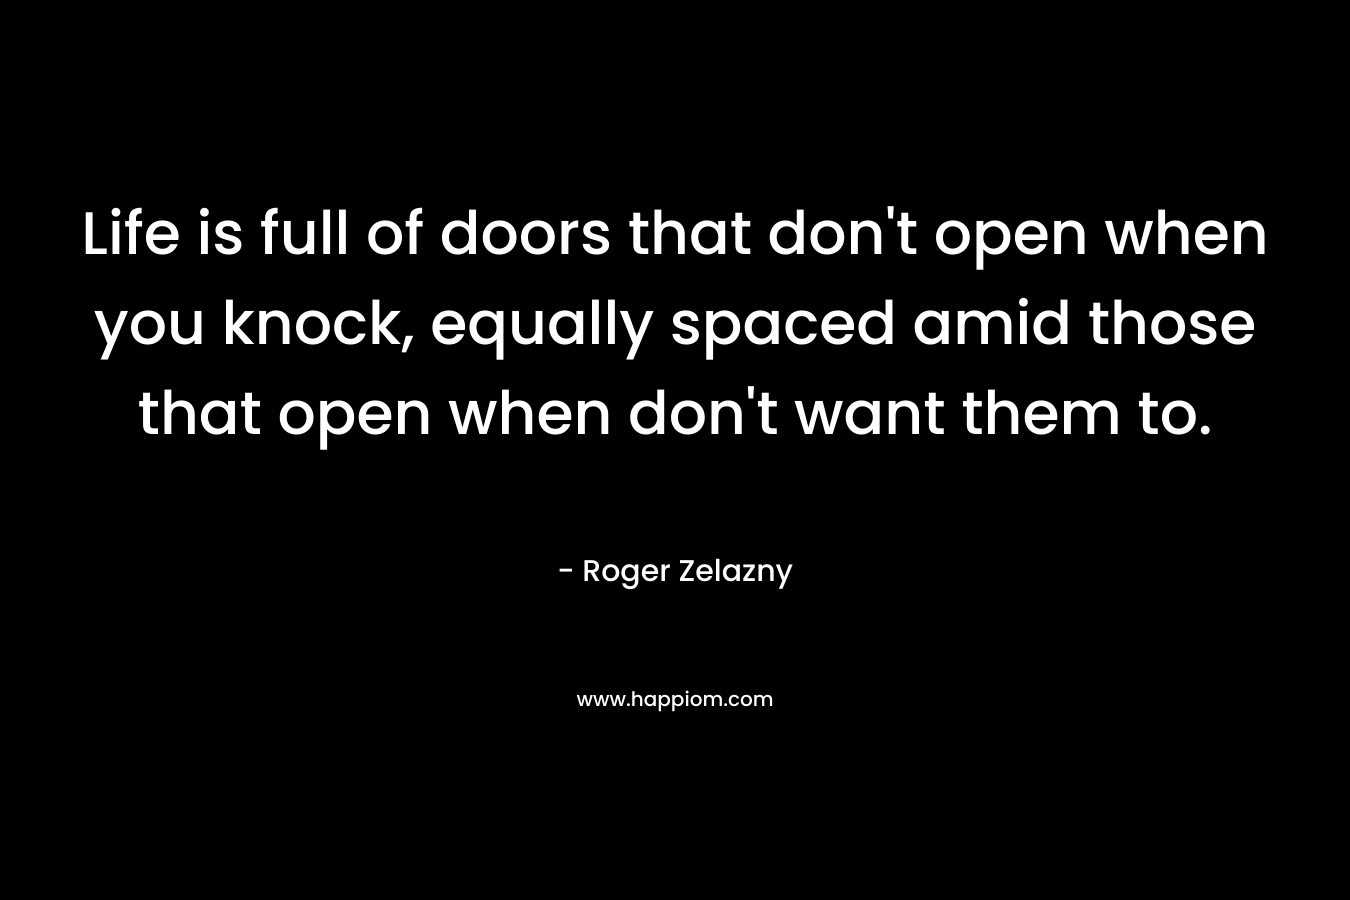 Life is full of doors that don’t open when you knock, equally spaced amid those that open when don’t want them to. – Roger Zelazny